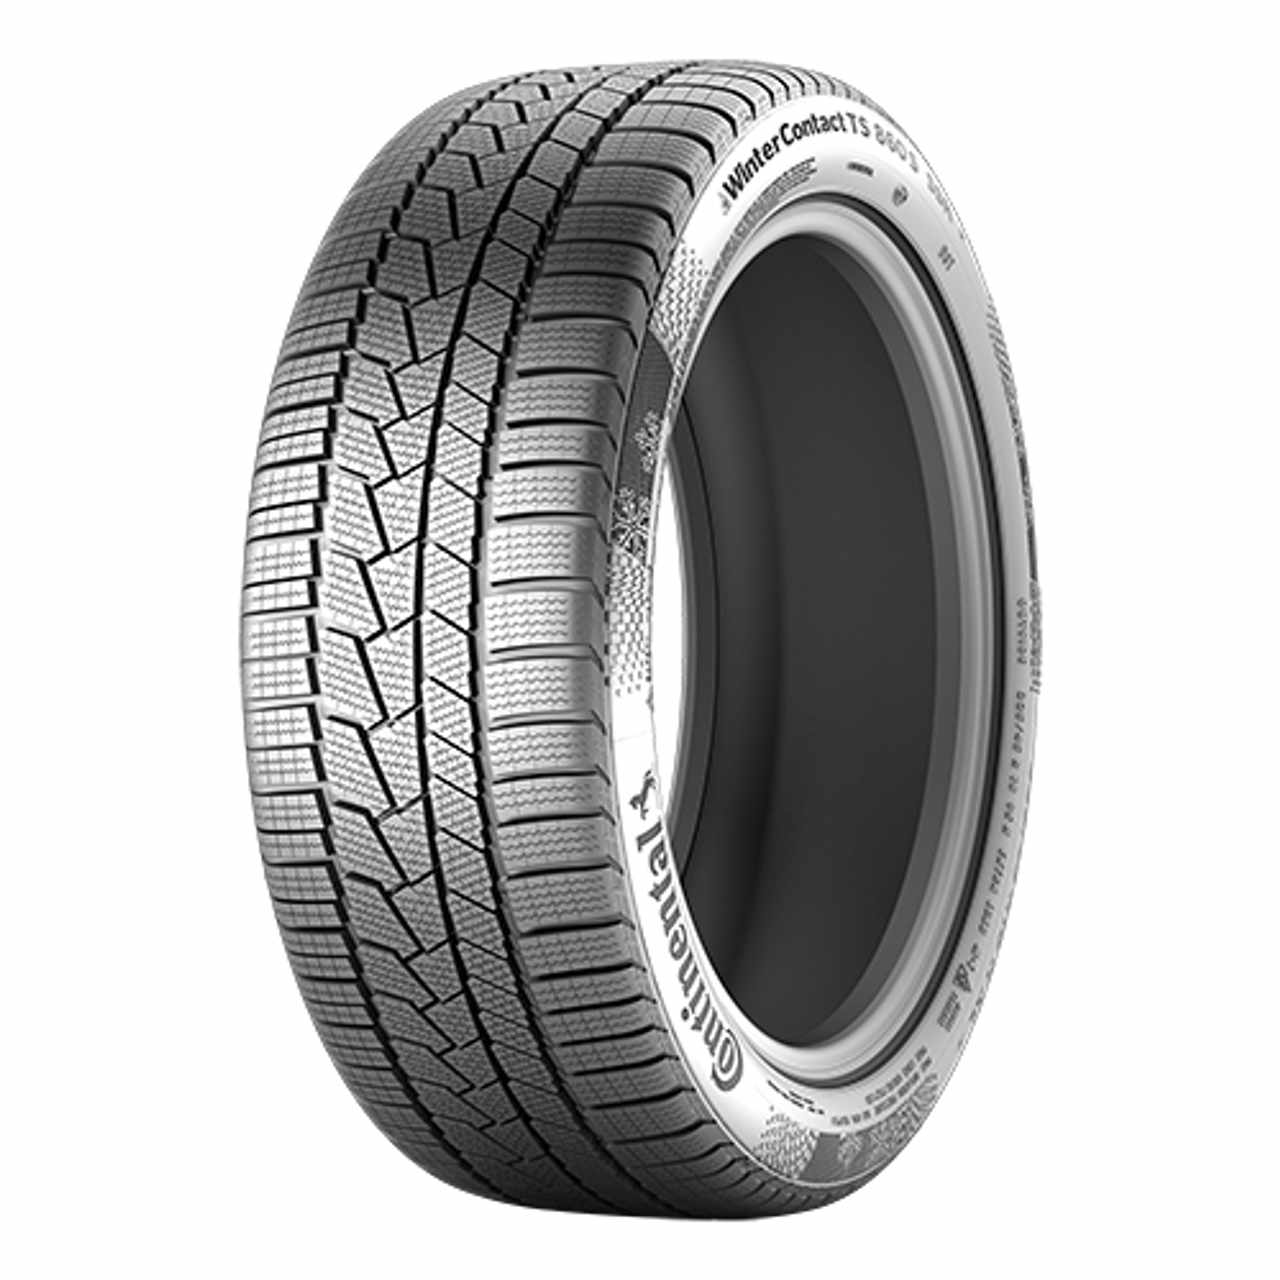 CONTINENTAL WINTERCONTACT TS 860 S (EVc) 255/45R19 104V FR BSW XL